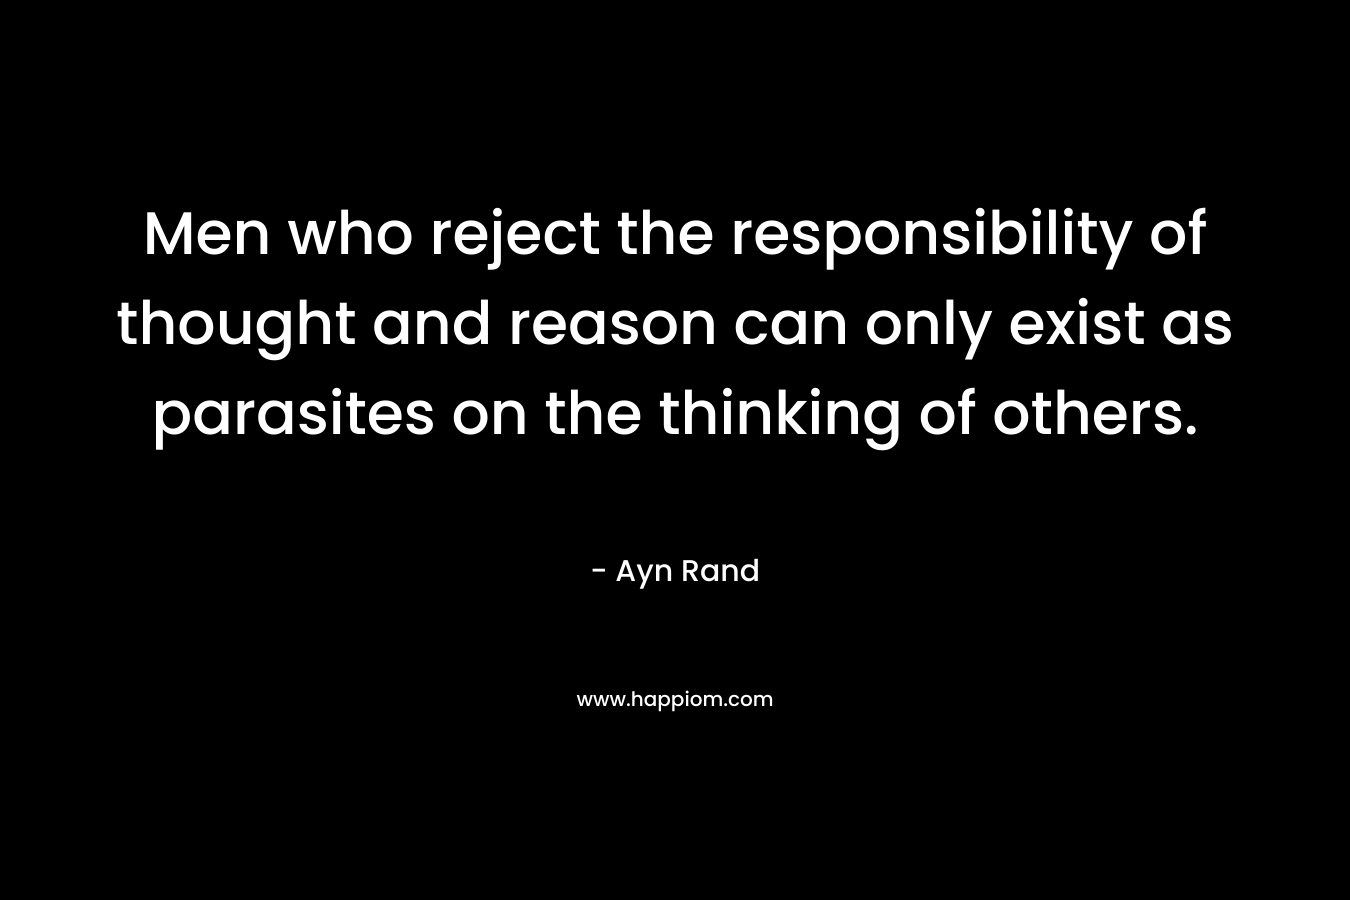 Men who reject the responsibility of thought and reason can only exist as parasites on the thinking of others.